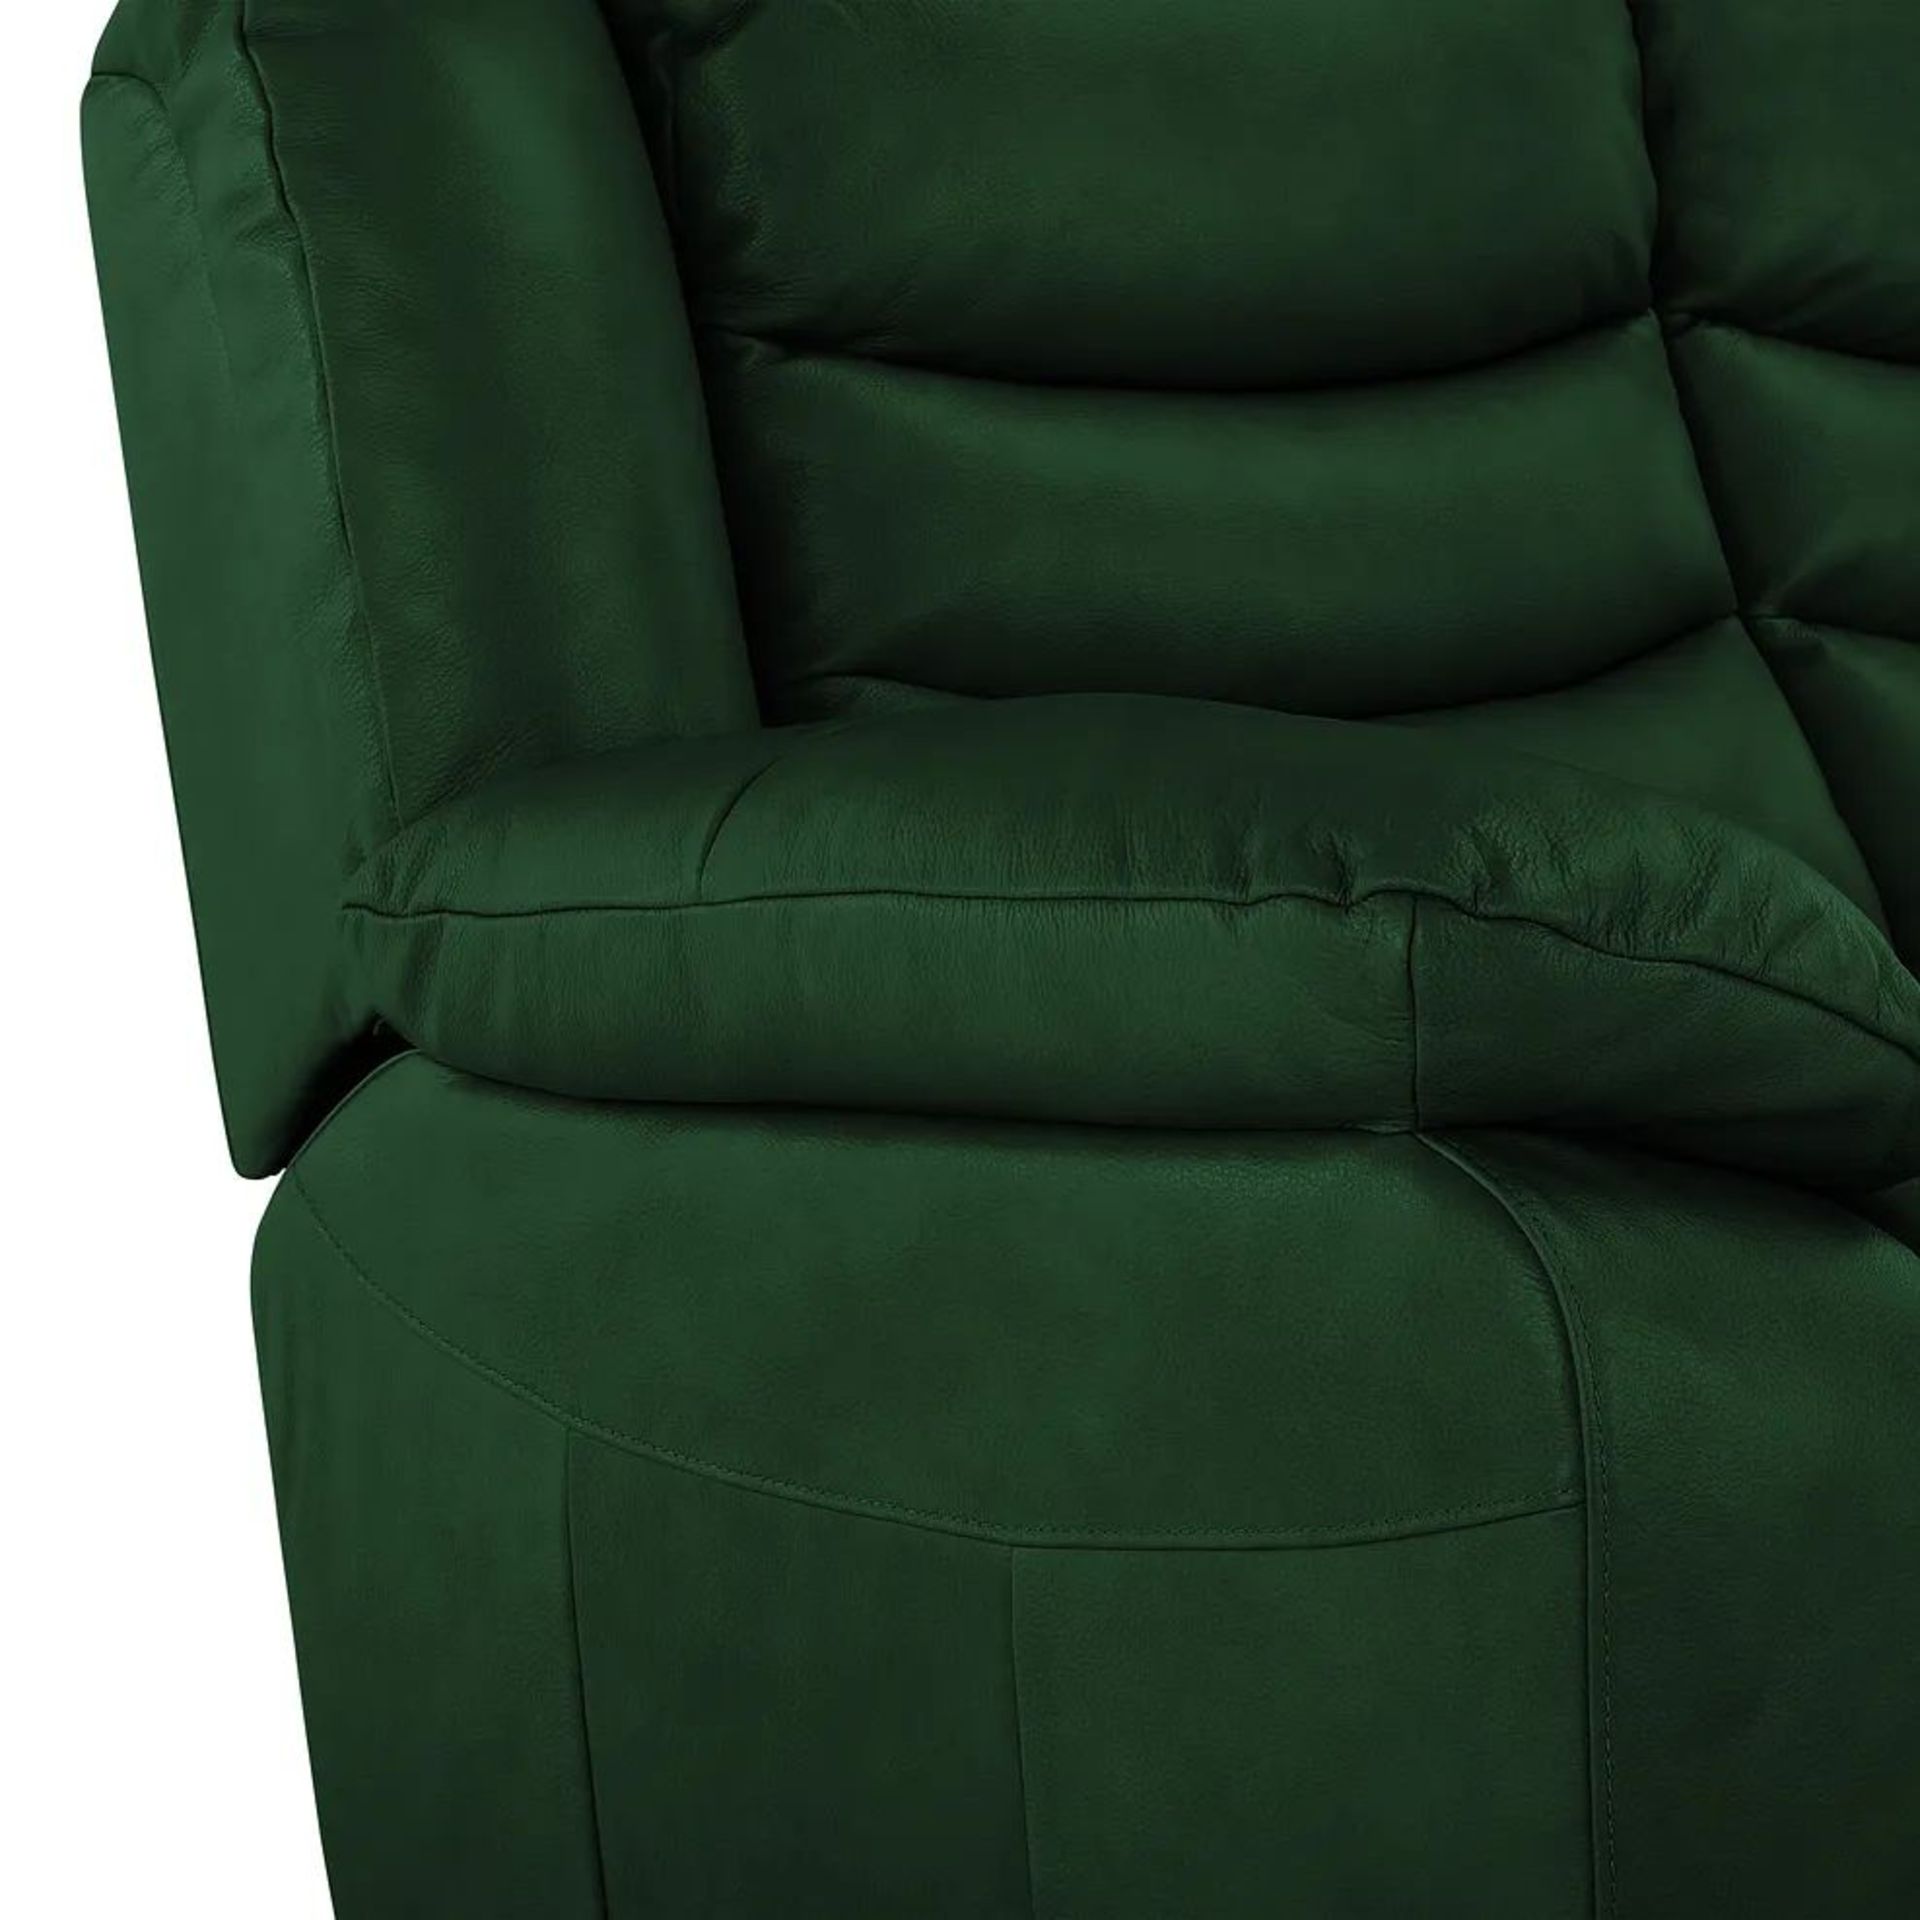 BRAND NEW MARLOW 3 Seater Sofa - GREEN LEATHER. RRP £1599. Our Marlow leather sofa range is a - Image 6 of 7